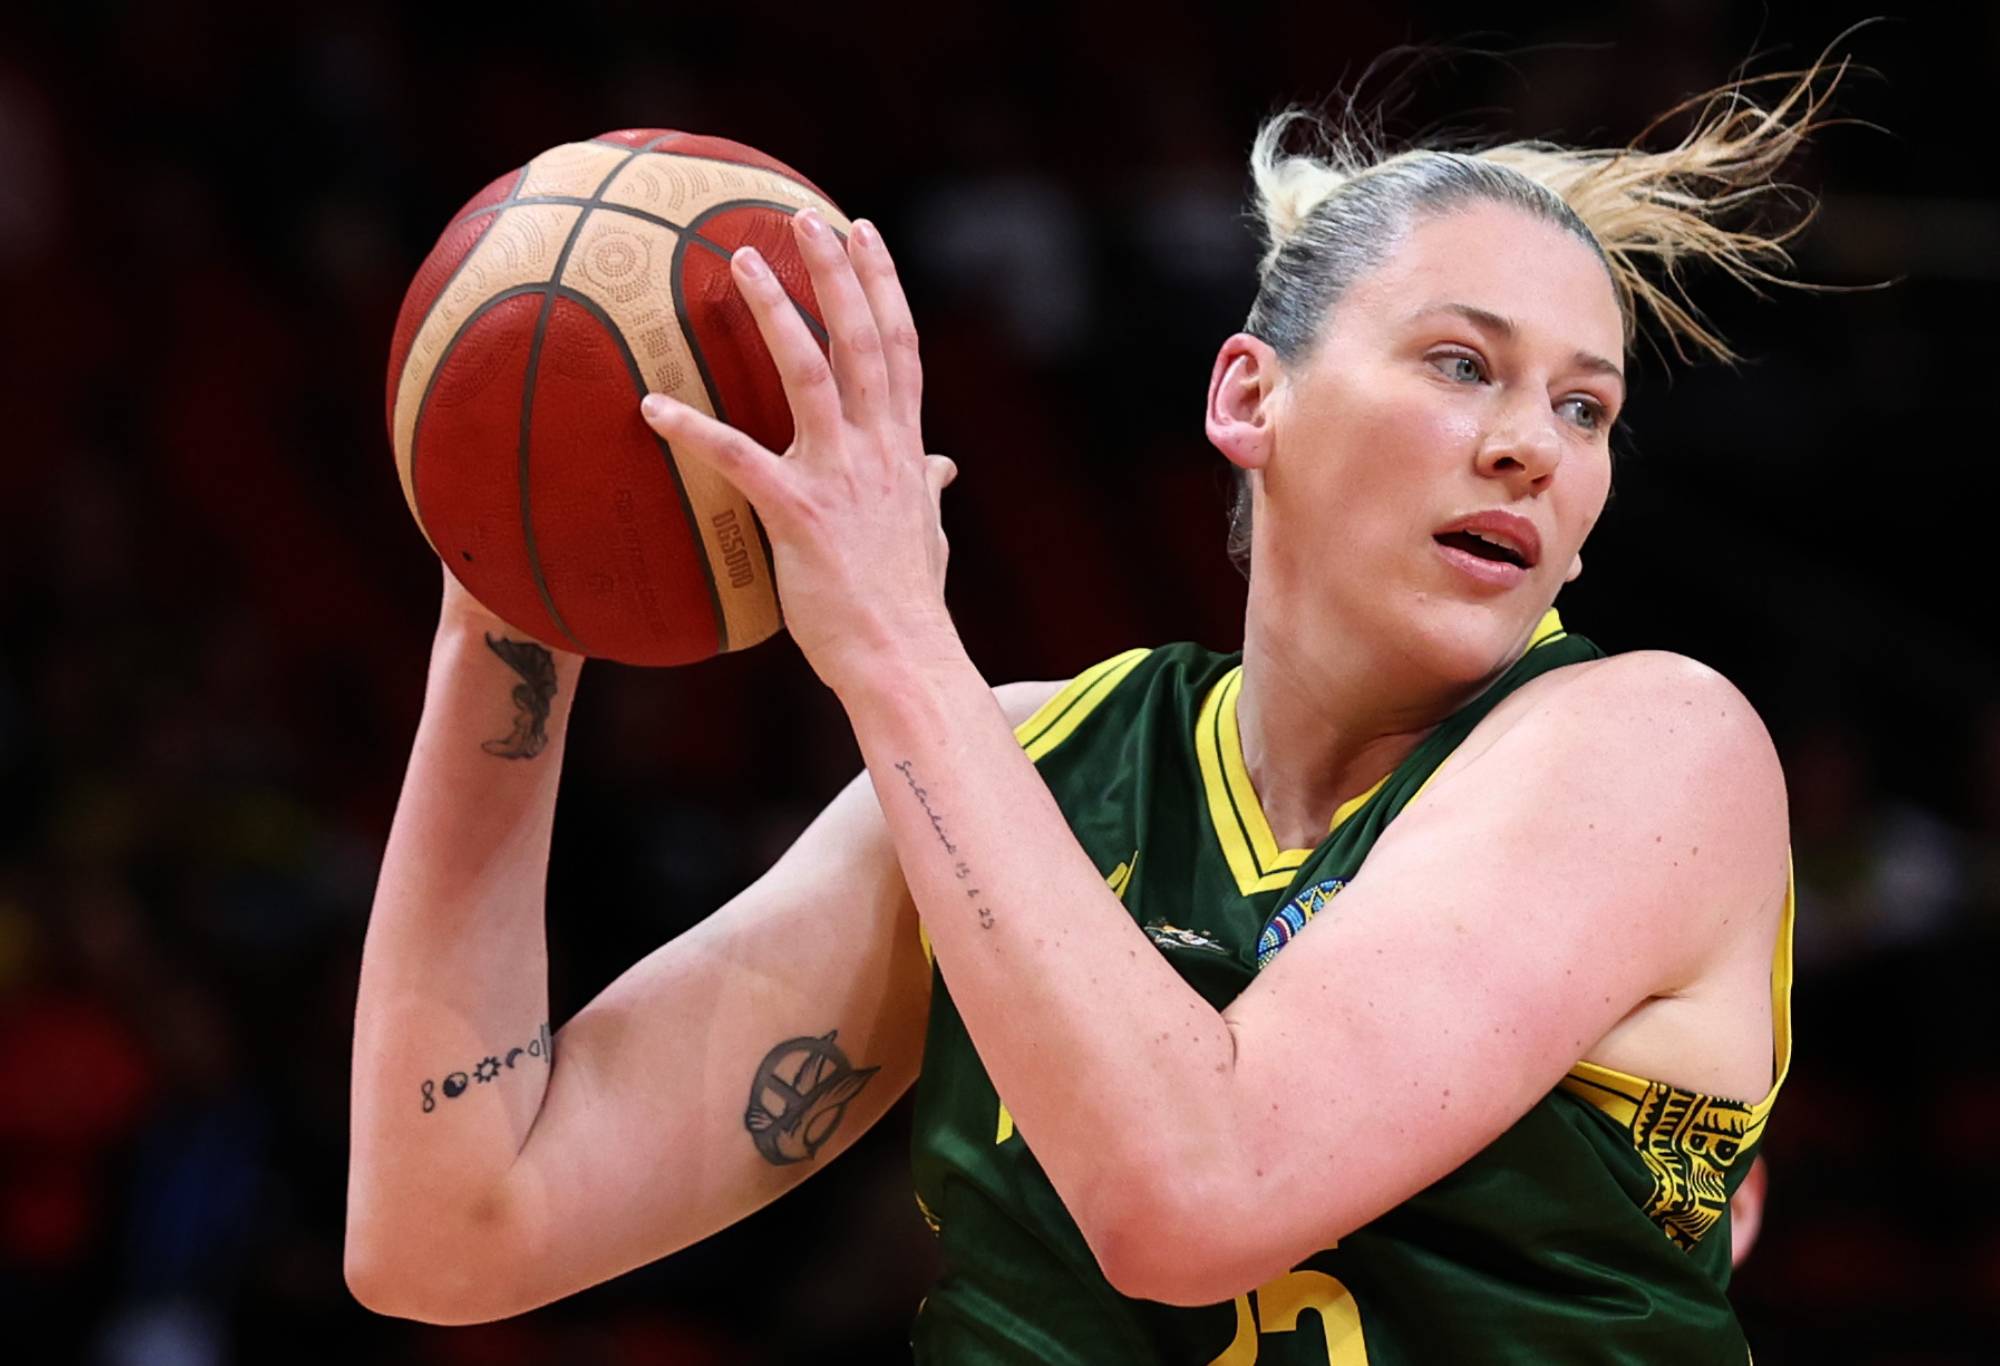 SYDNEY, AUSTRALIA - SEPTEMBER 29: Lauren Jackson of Australia in action during the 2022 FIBA Women's Basketball World Cup Quarterfinal match between Australia and Belgium at Sydney Superdome, on September 29, 2022, in Sydney, Australia. (Photo by Mark Metcalfe/Getty Images)